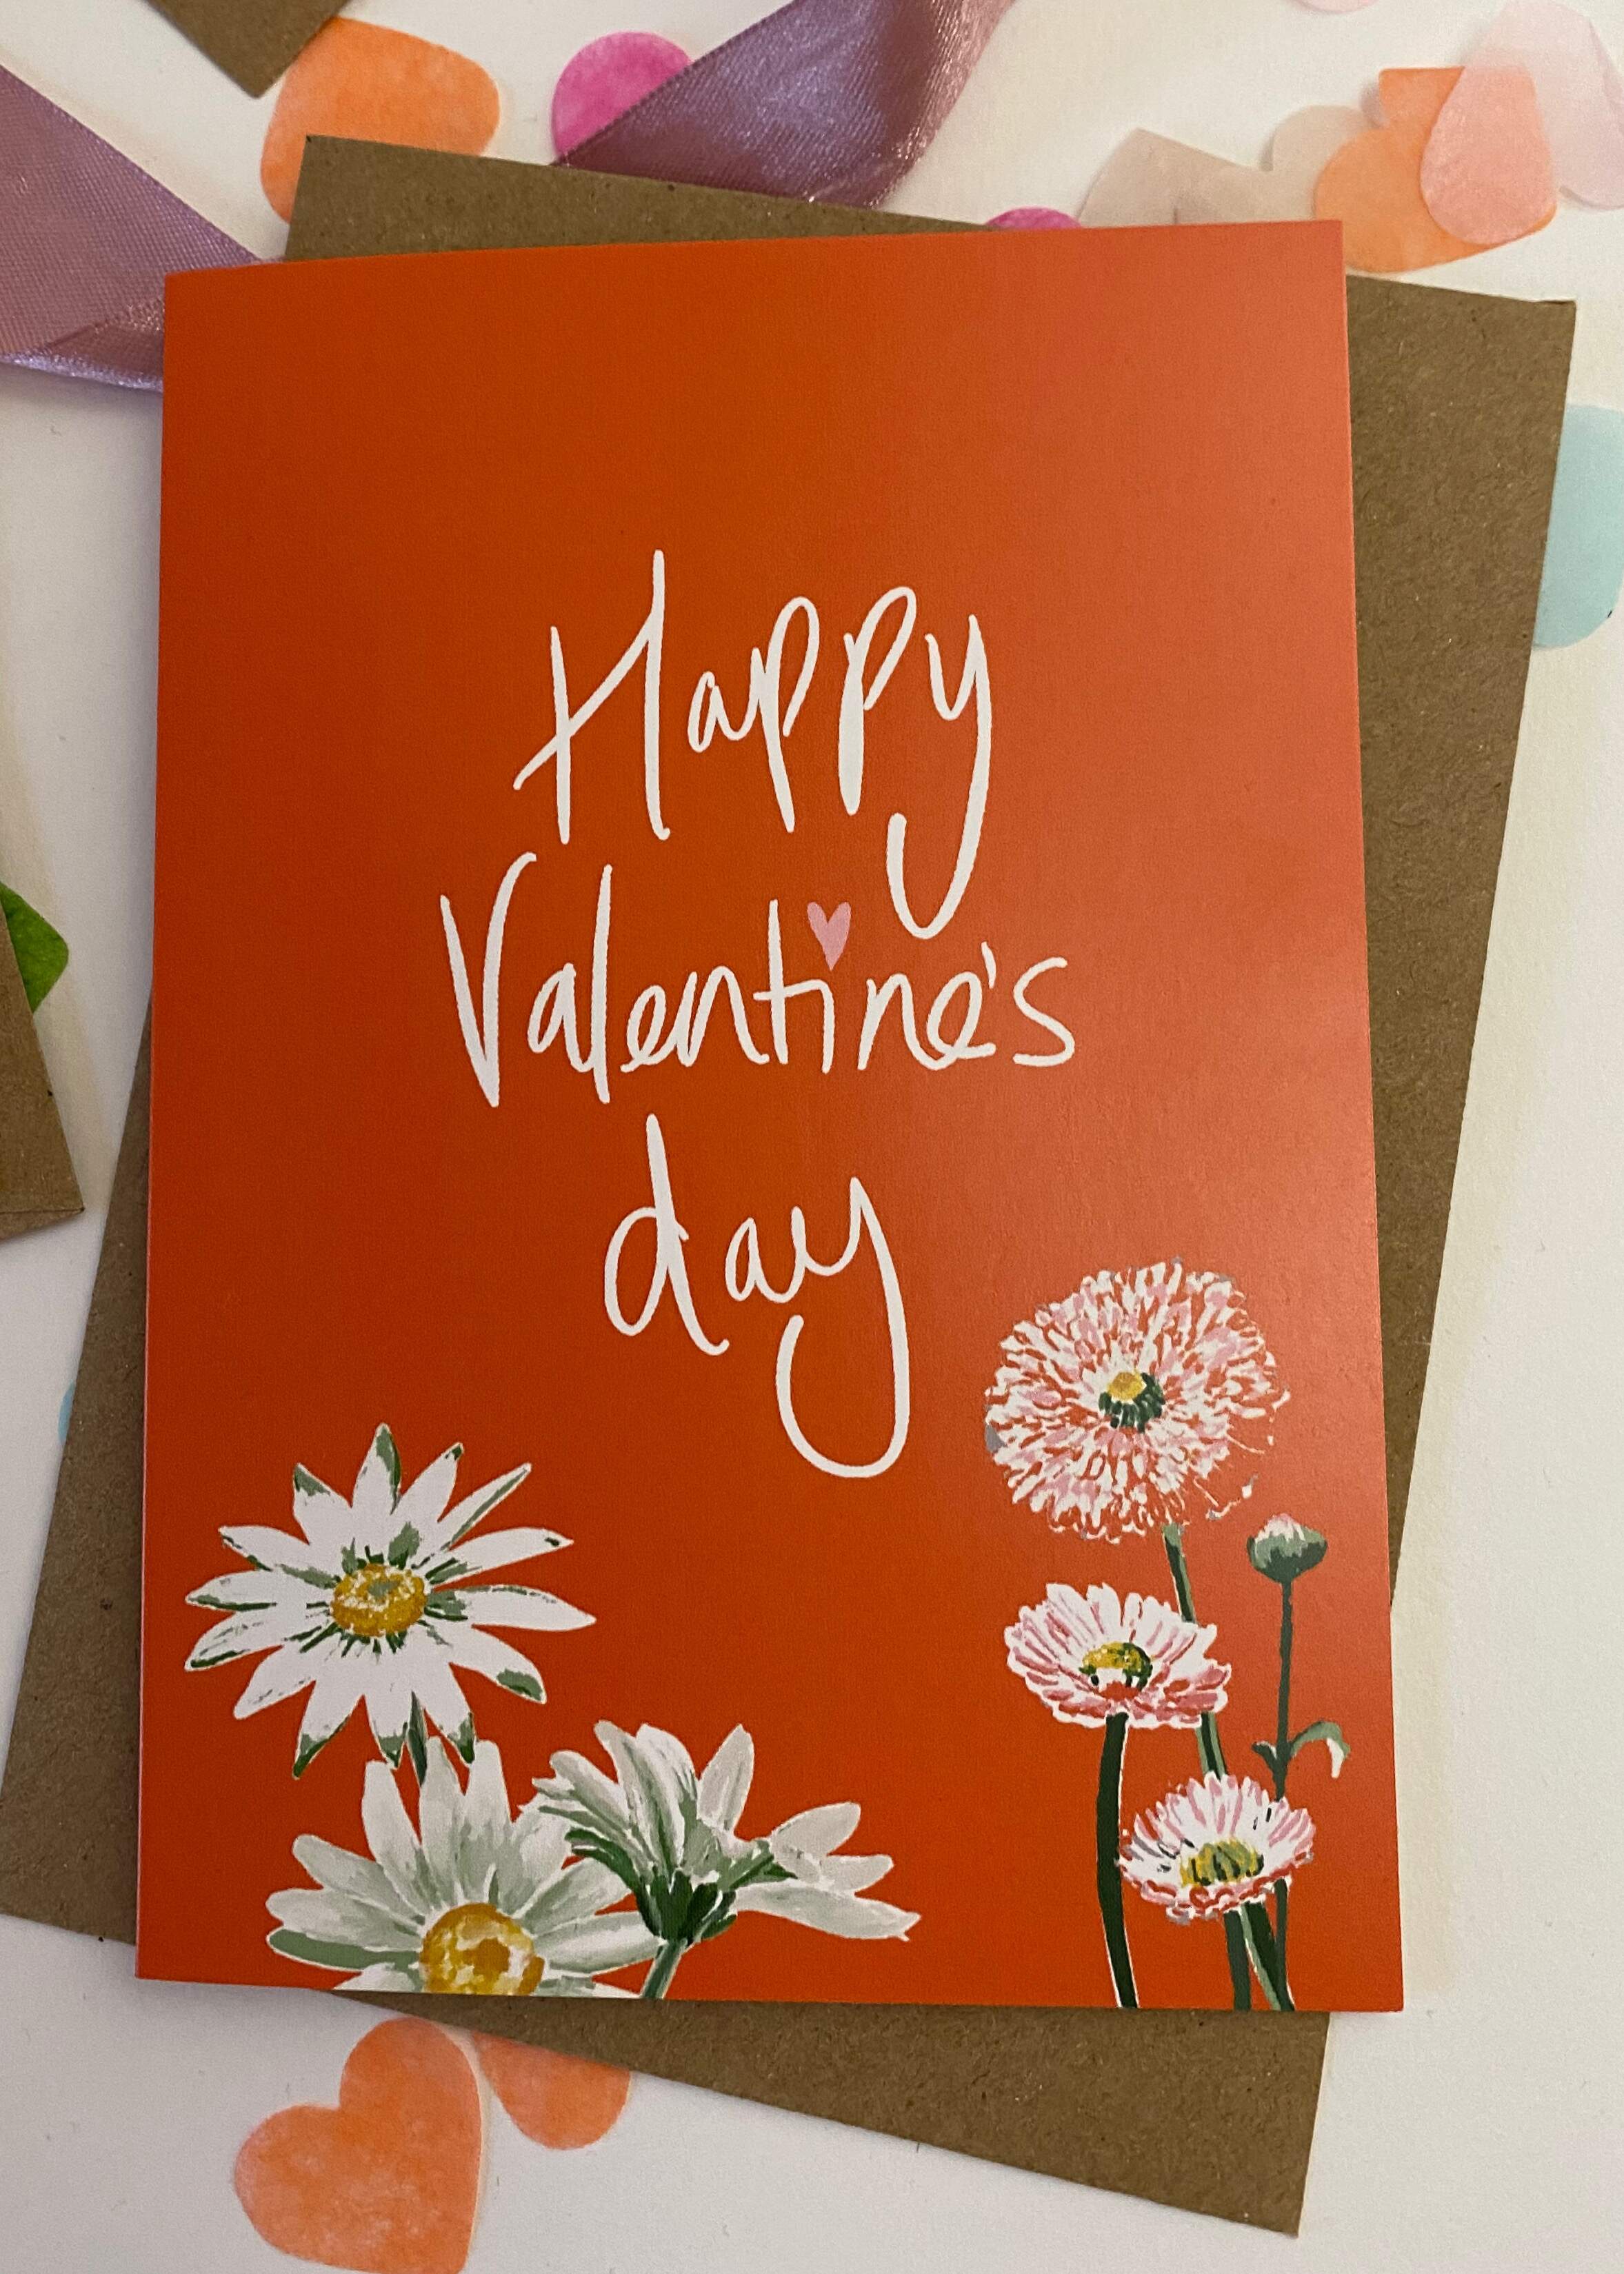 Happy Valentine’s Day greeting card with FREE biodegradable heart confetti inside LMV006